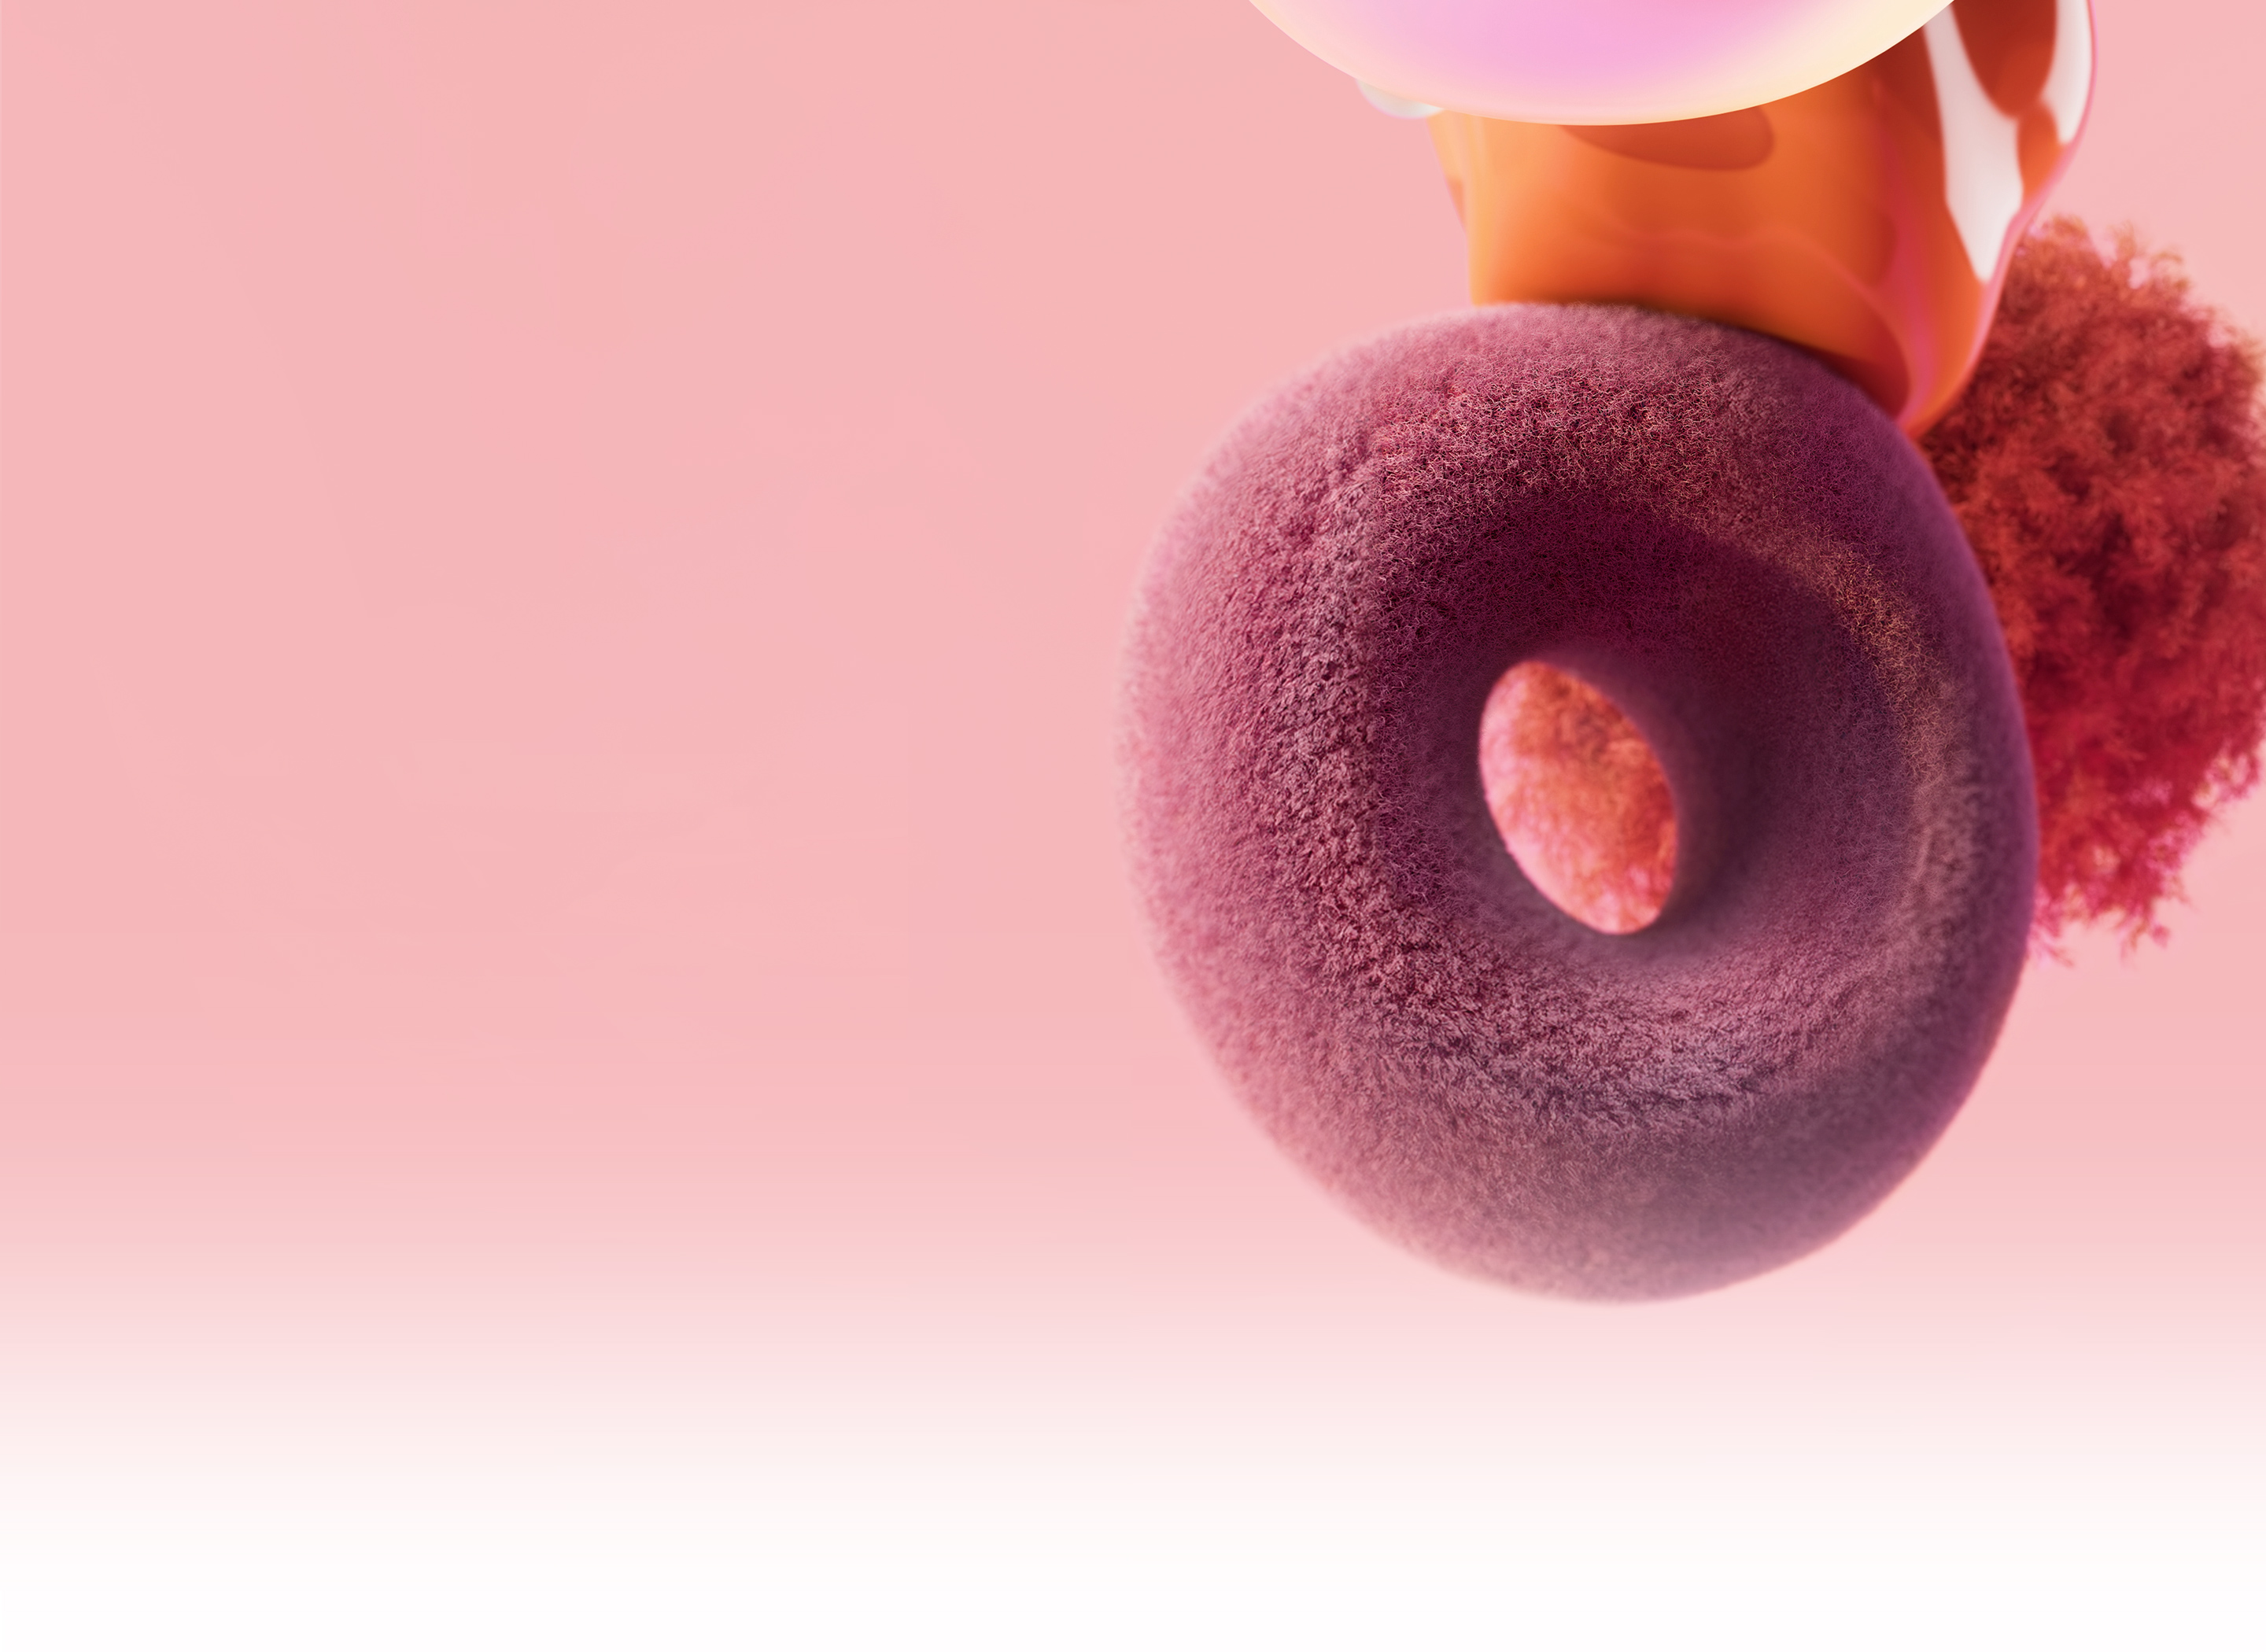 An image of a retro-inspired purple donut on a pink background, with the text "Innovative - Delving into New Realms of Discovery" in English